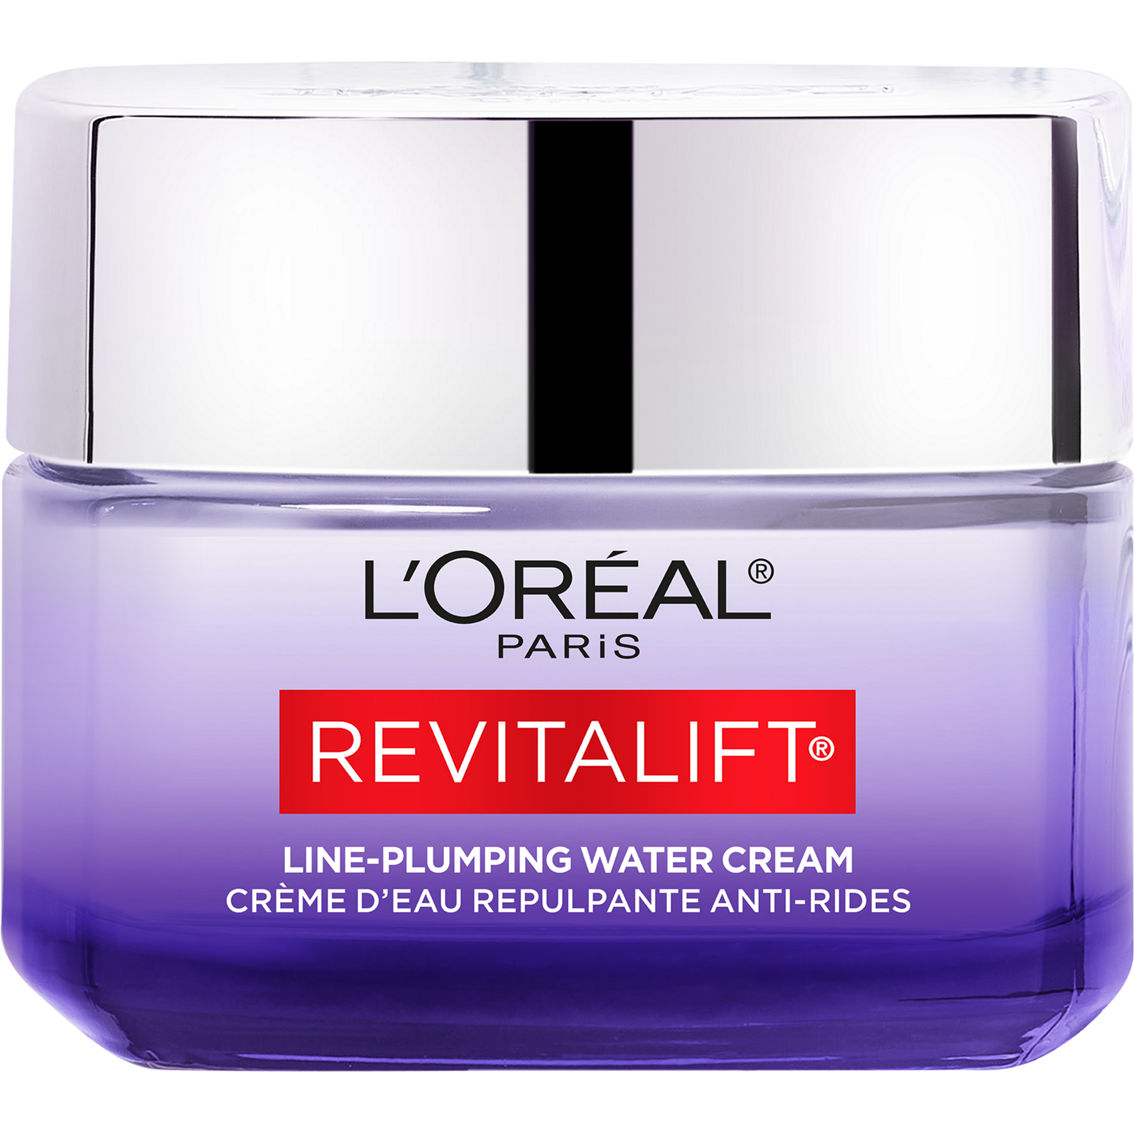 L'Oreal Micro Hyaluronic Acid + Ceramides Line-Plumping Water Cream - Image 3 of 10